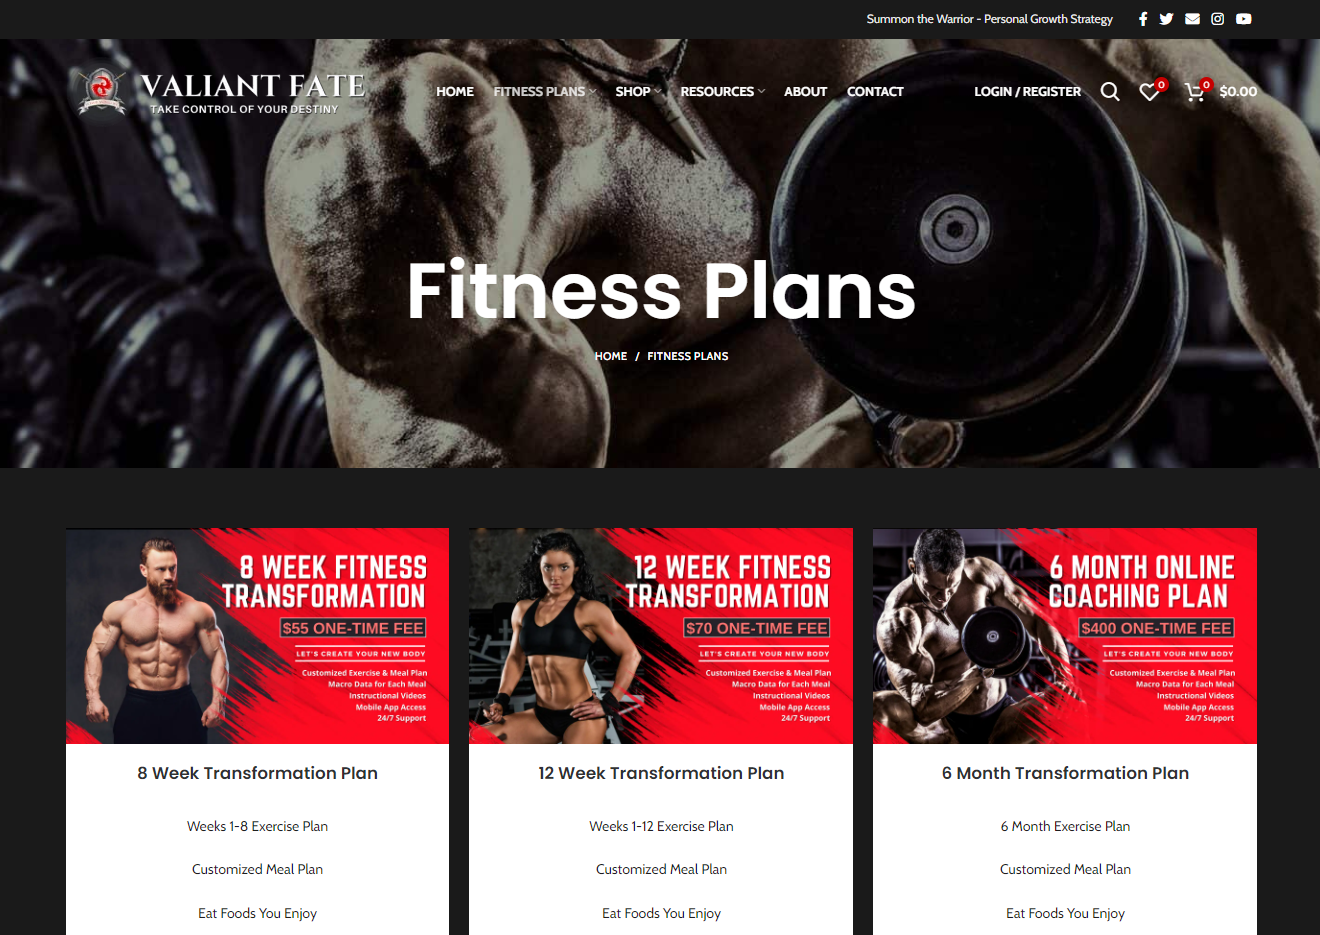 Valiant Fate Online Fitness Coaching